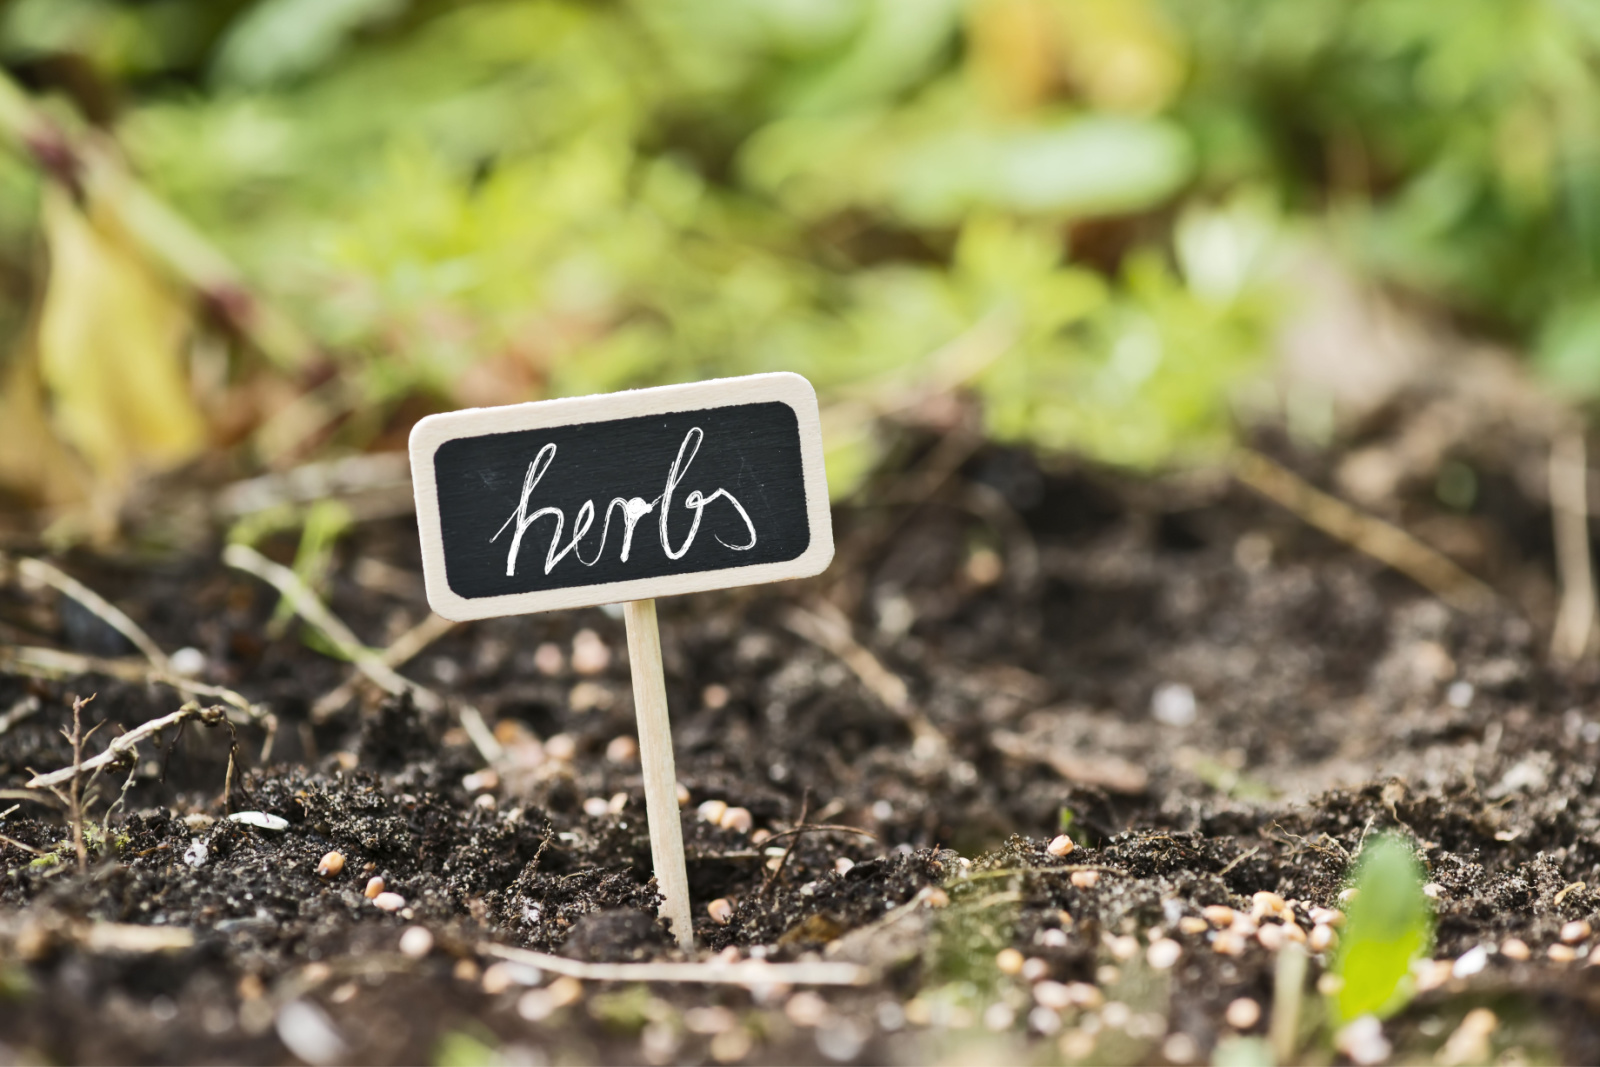 garden soil with a label saying herbs